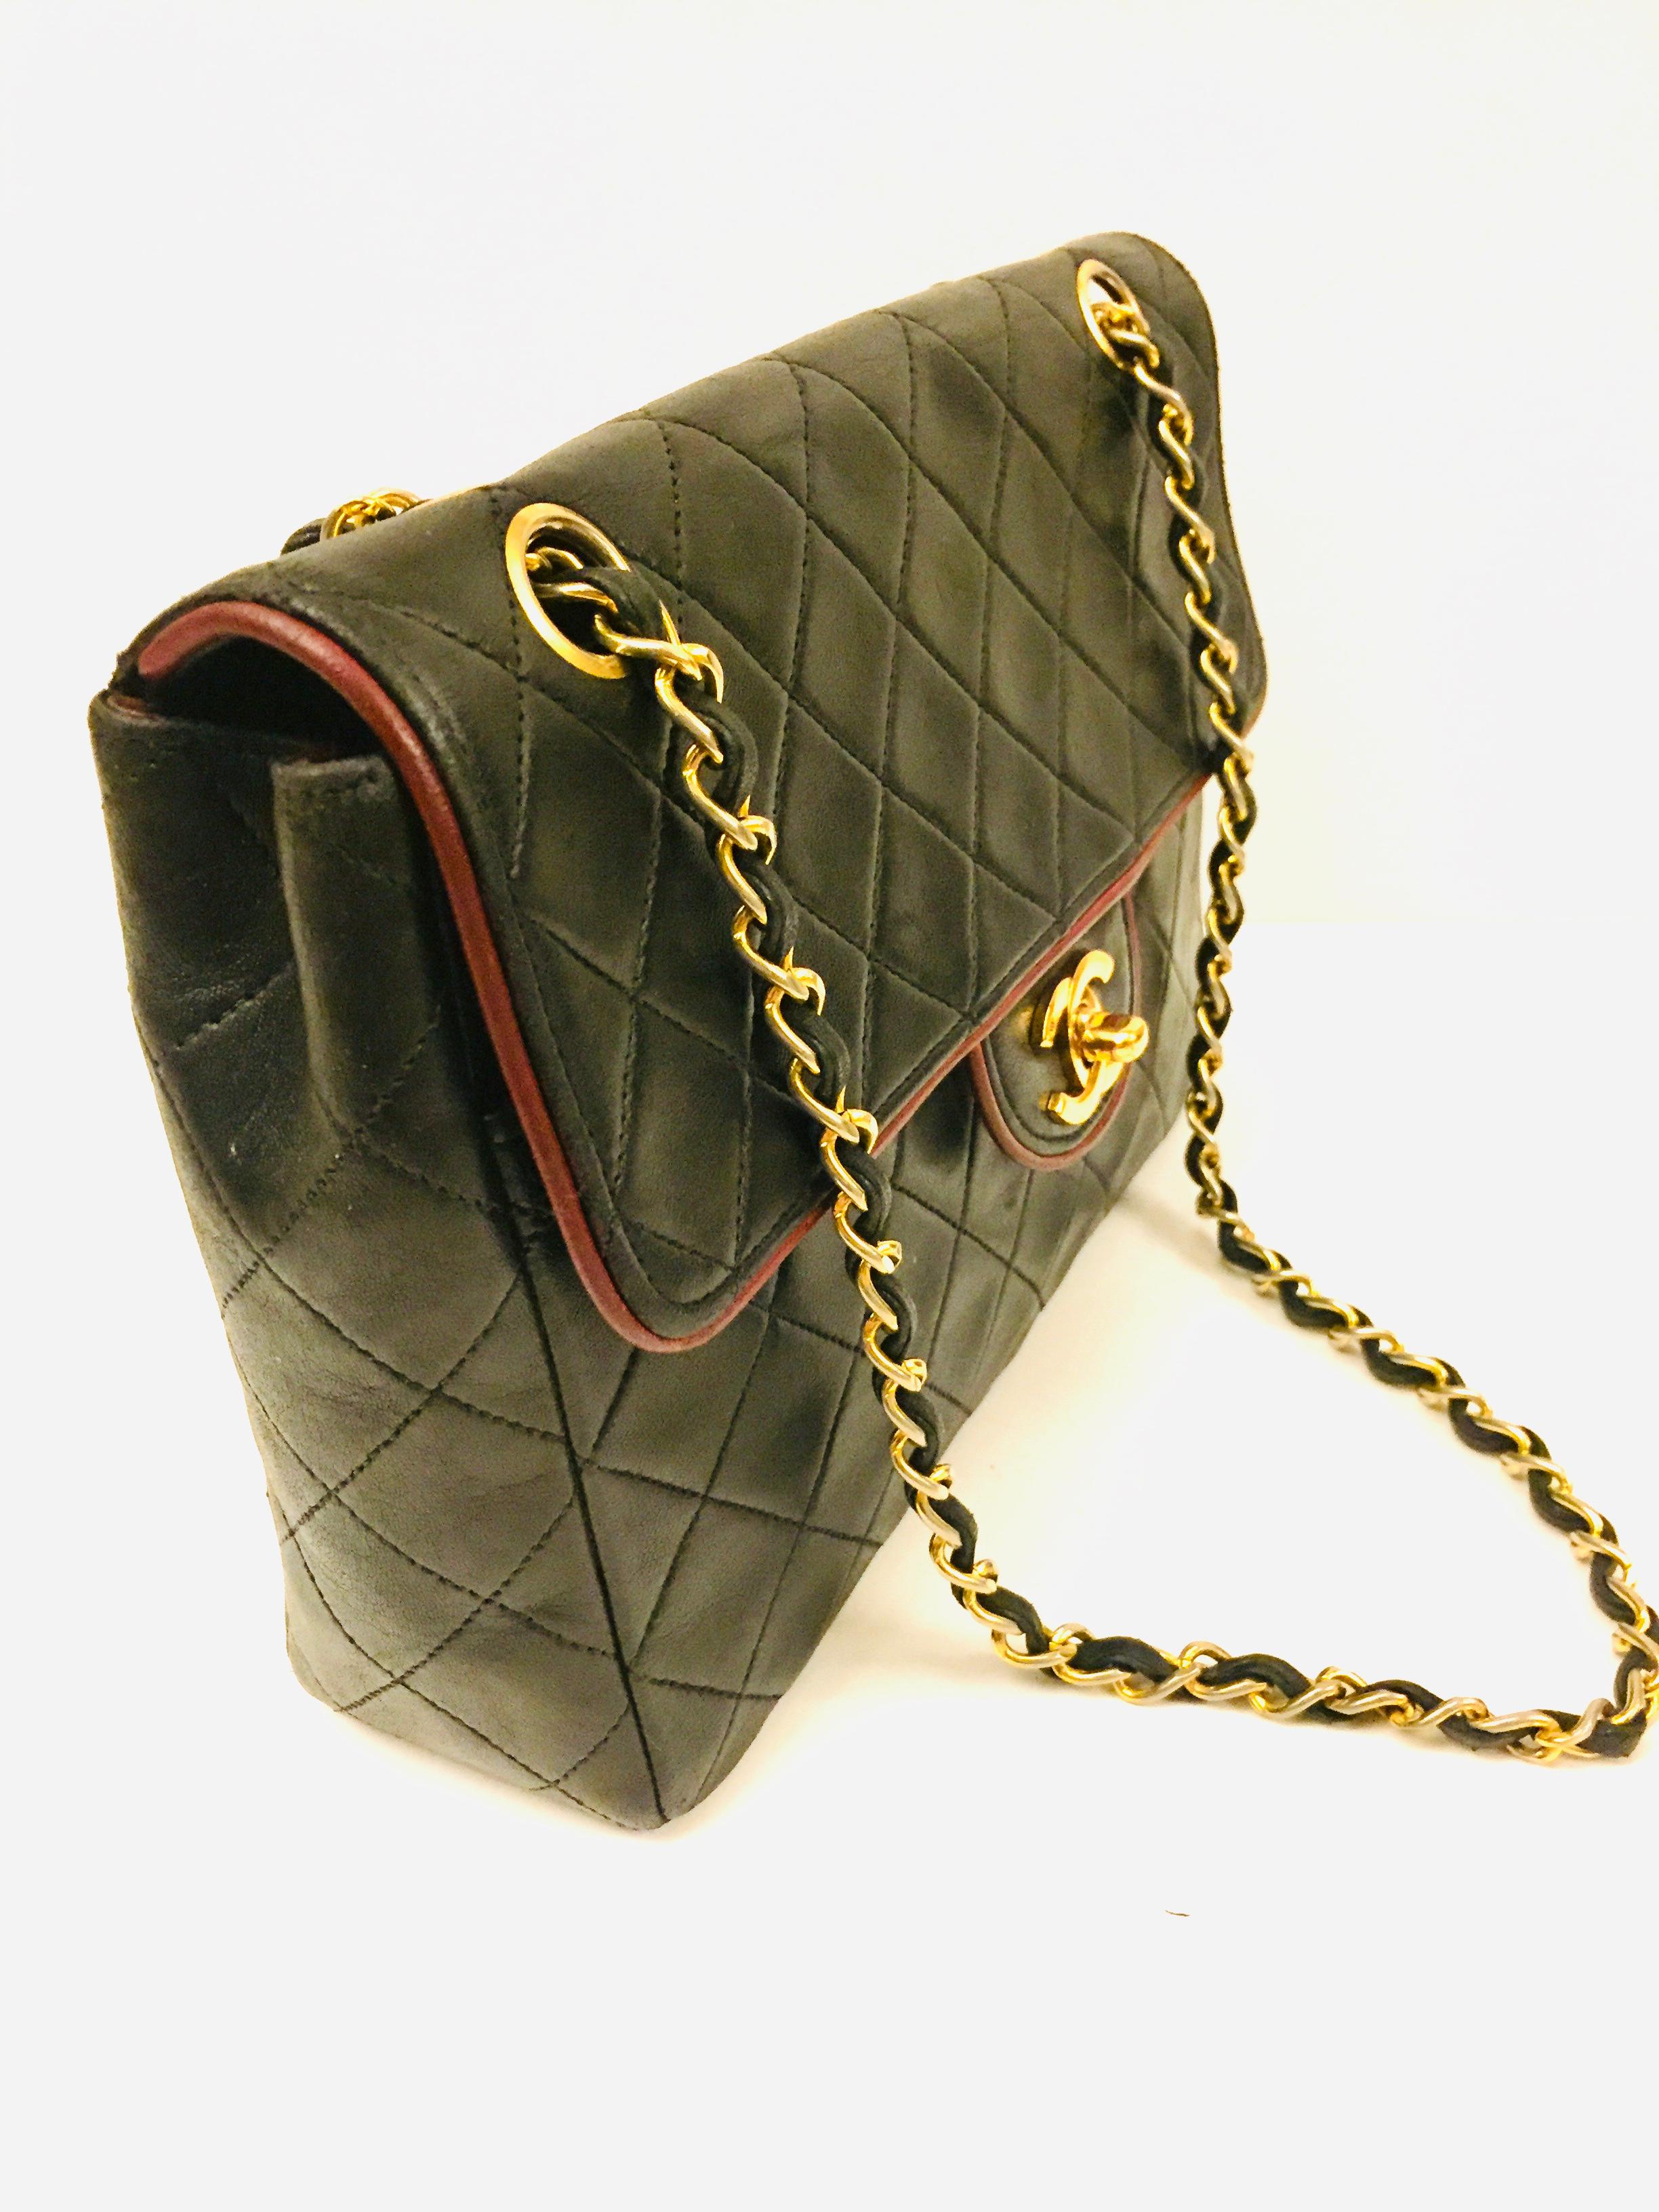 - VIntage 80s Chanel black quilted lambskin with red piping gold chain shoulder bag. 

- Red interior leather with compartments and zip closure. 

- Turn lock closure. 

- Back pocket. 

- Sticker, dust bag.

- Measurements: 24cm x 15cm x 6cm.